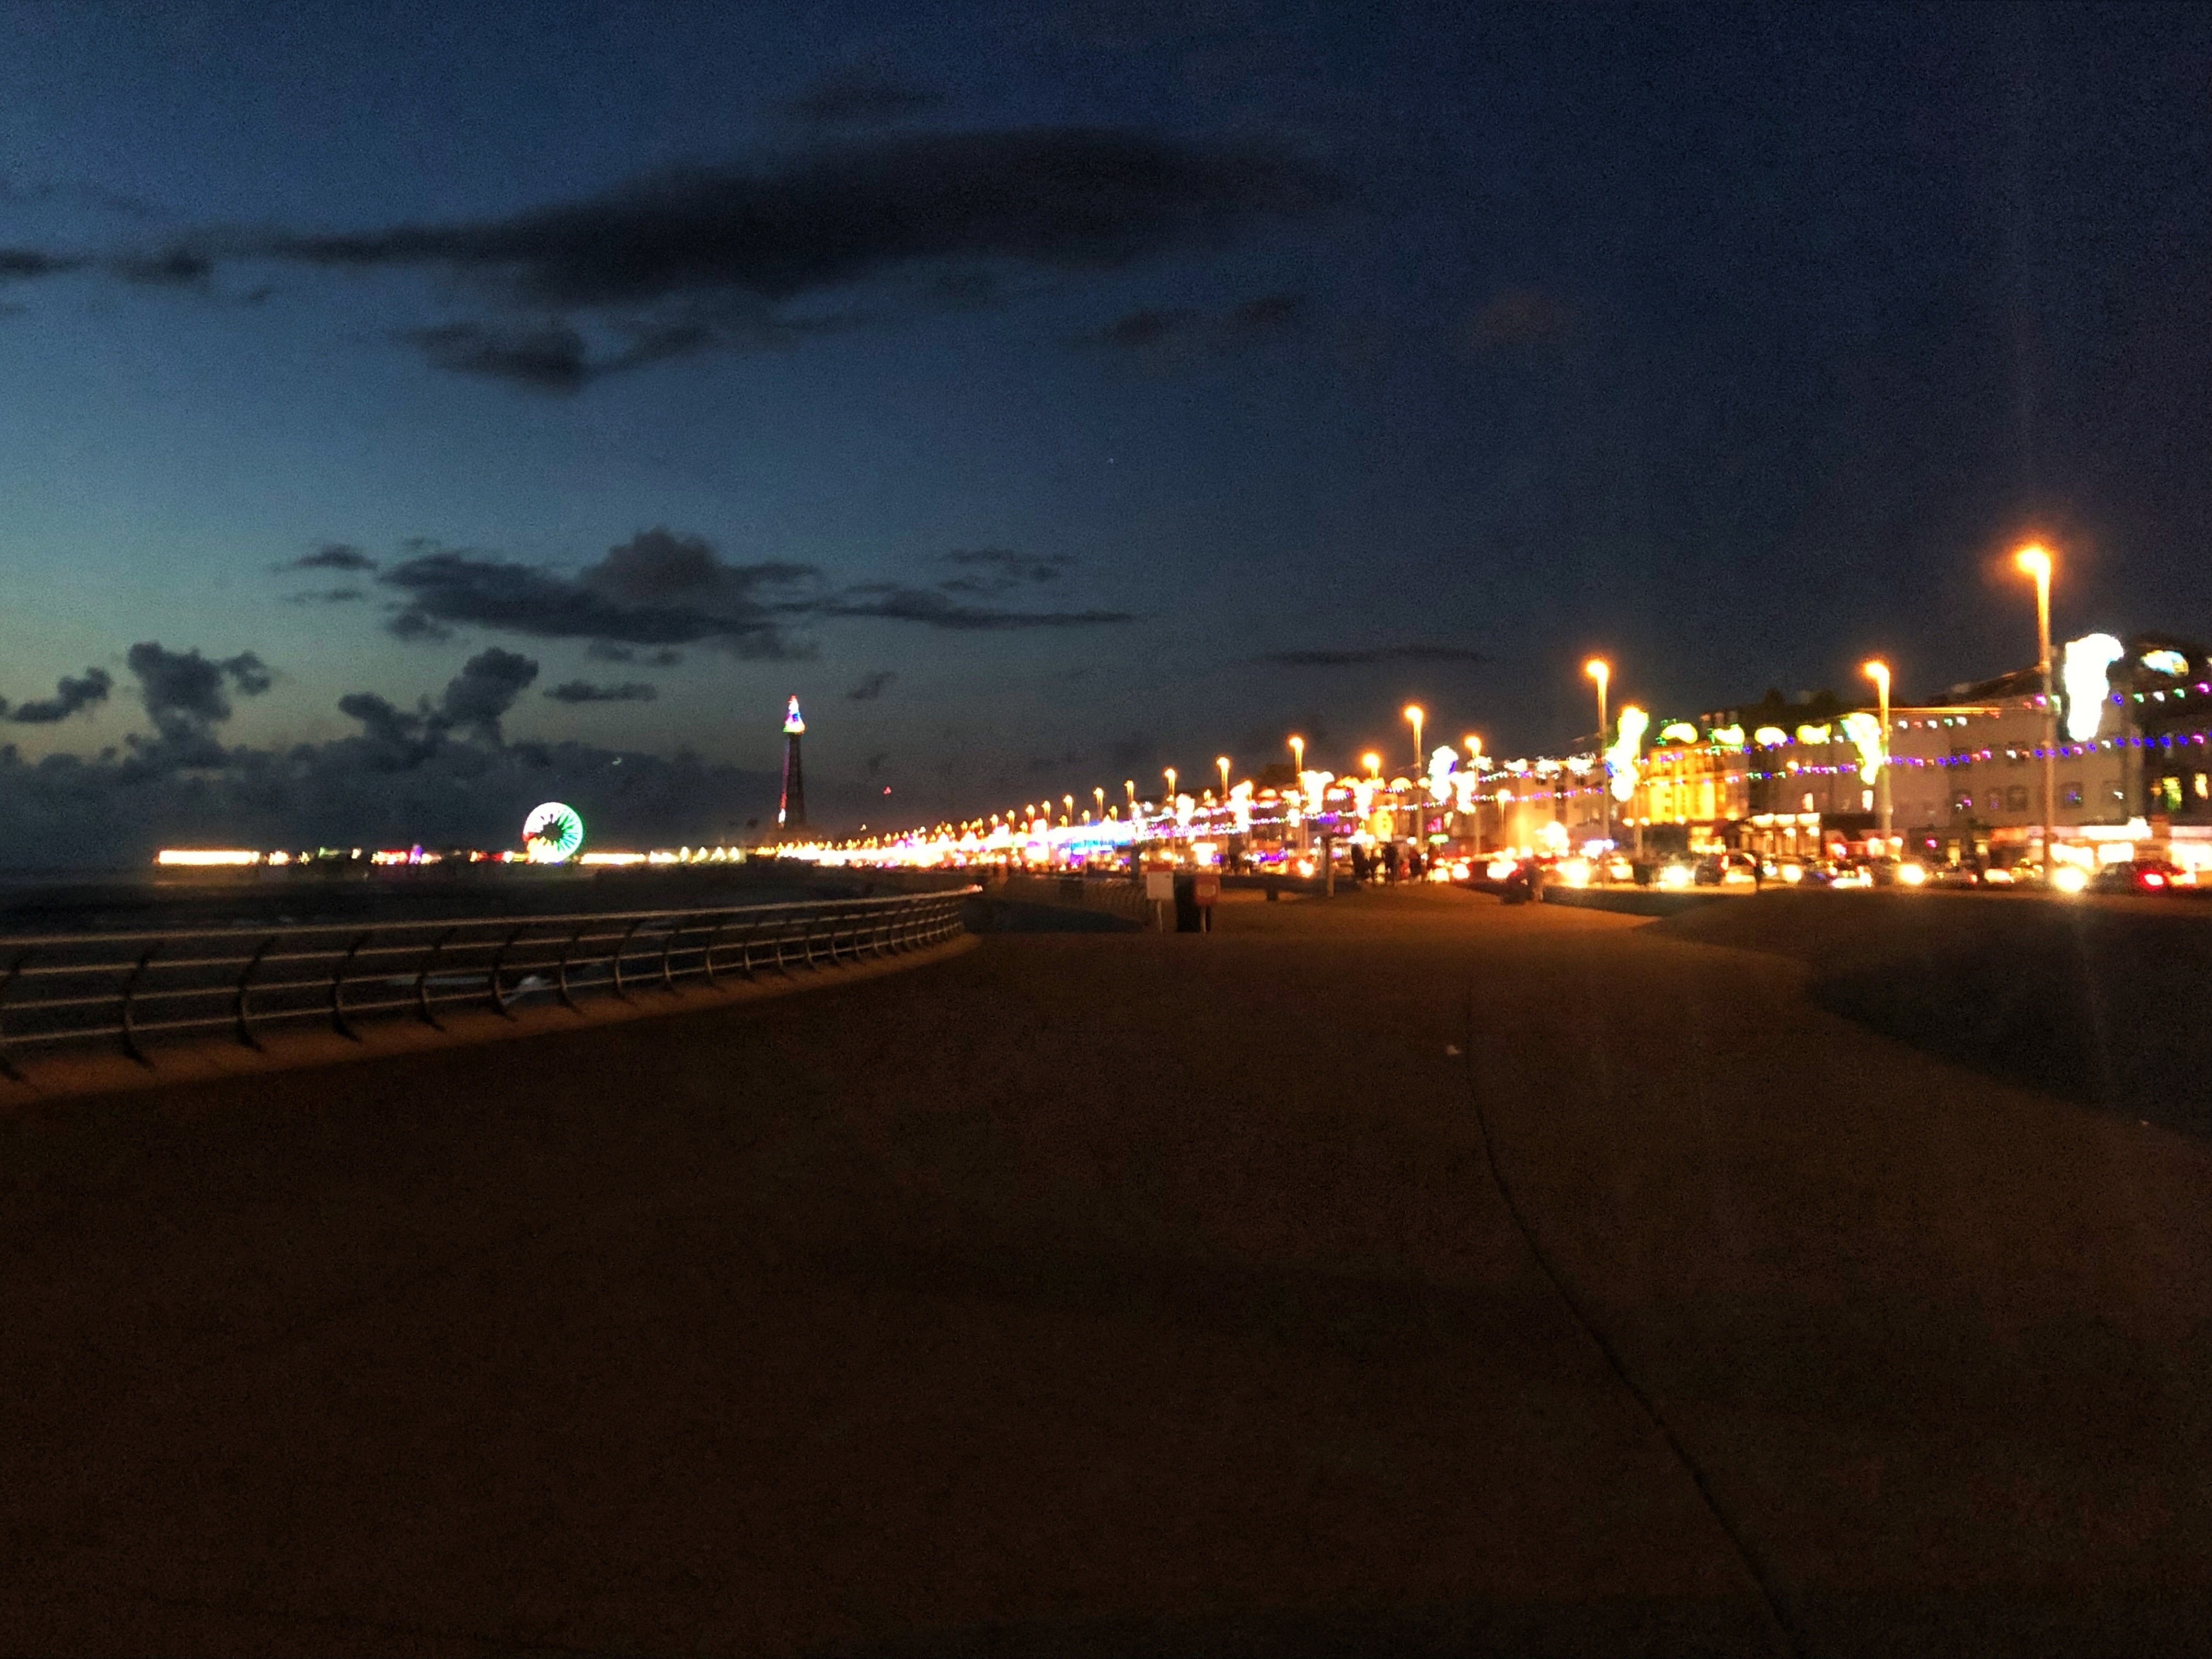 Only on for a few weeks in the later part of the year the famous illuminations at Blackpool see a large stretch of the promenade displayed in thousands of lights and illuminated displays. You can take a tram, walk or drive through them and it’s the perfect way to end a day here.